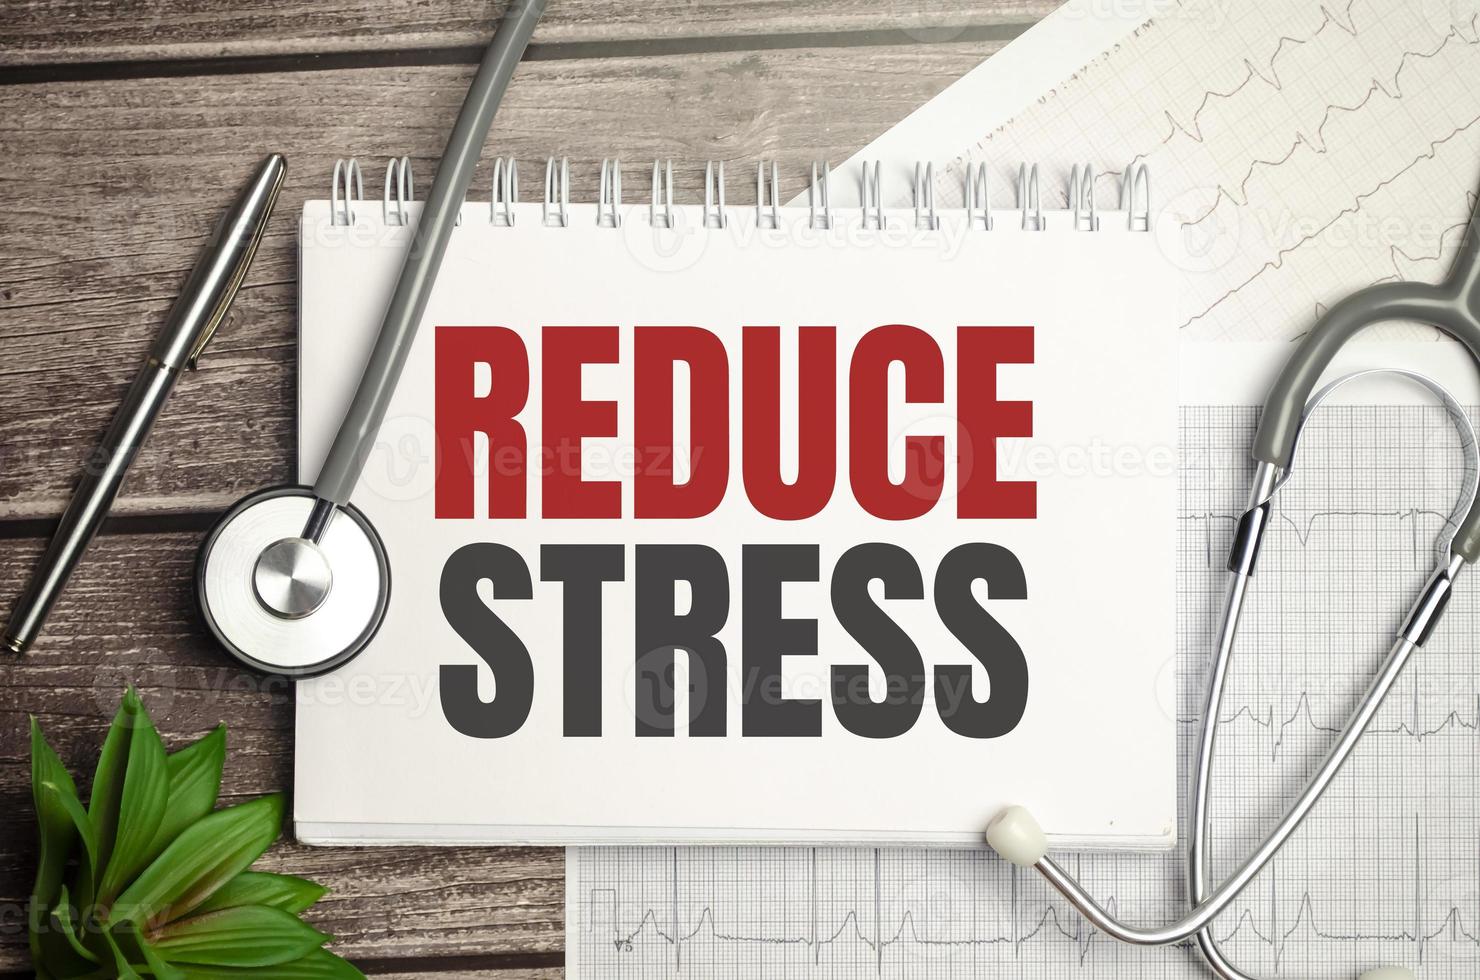 Text Reduce stress on a white background with stethoscope photo